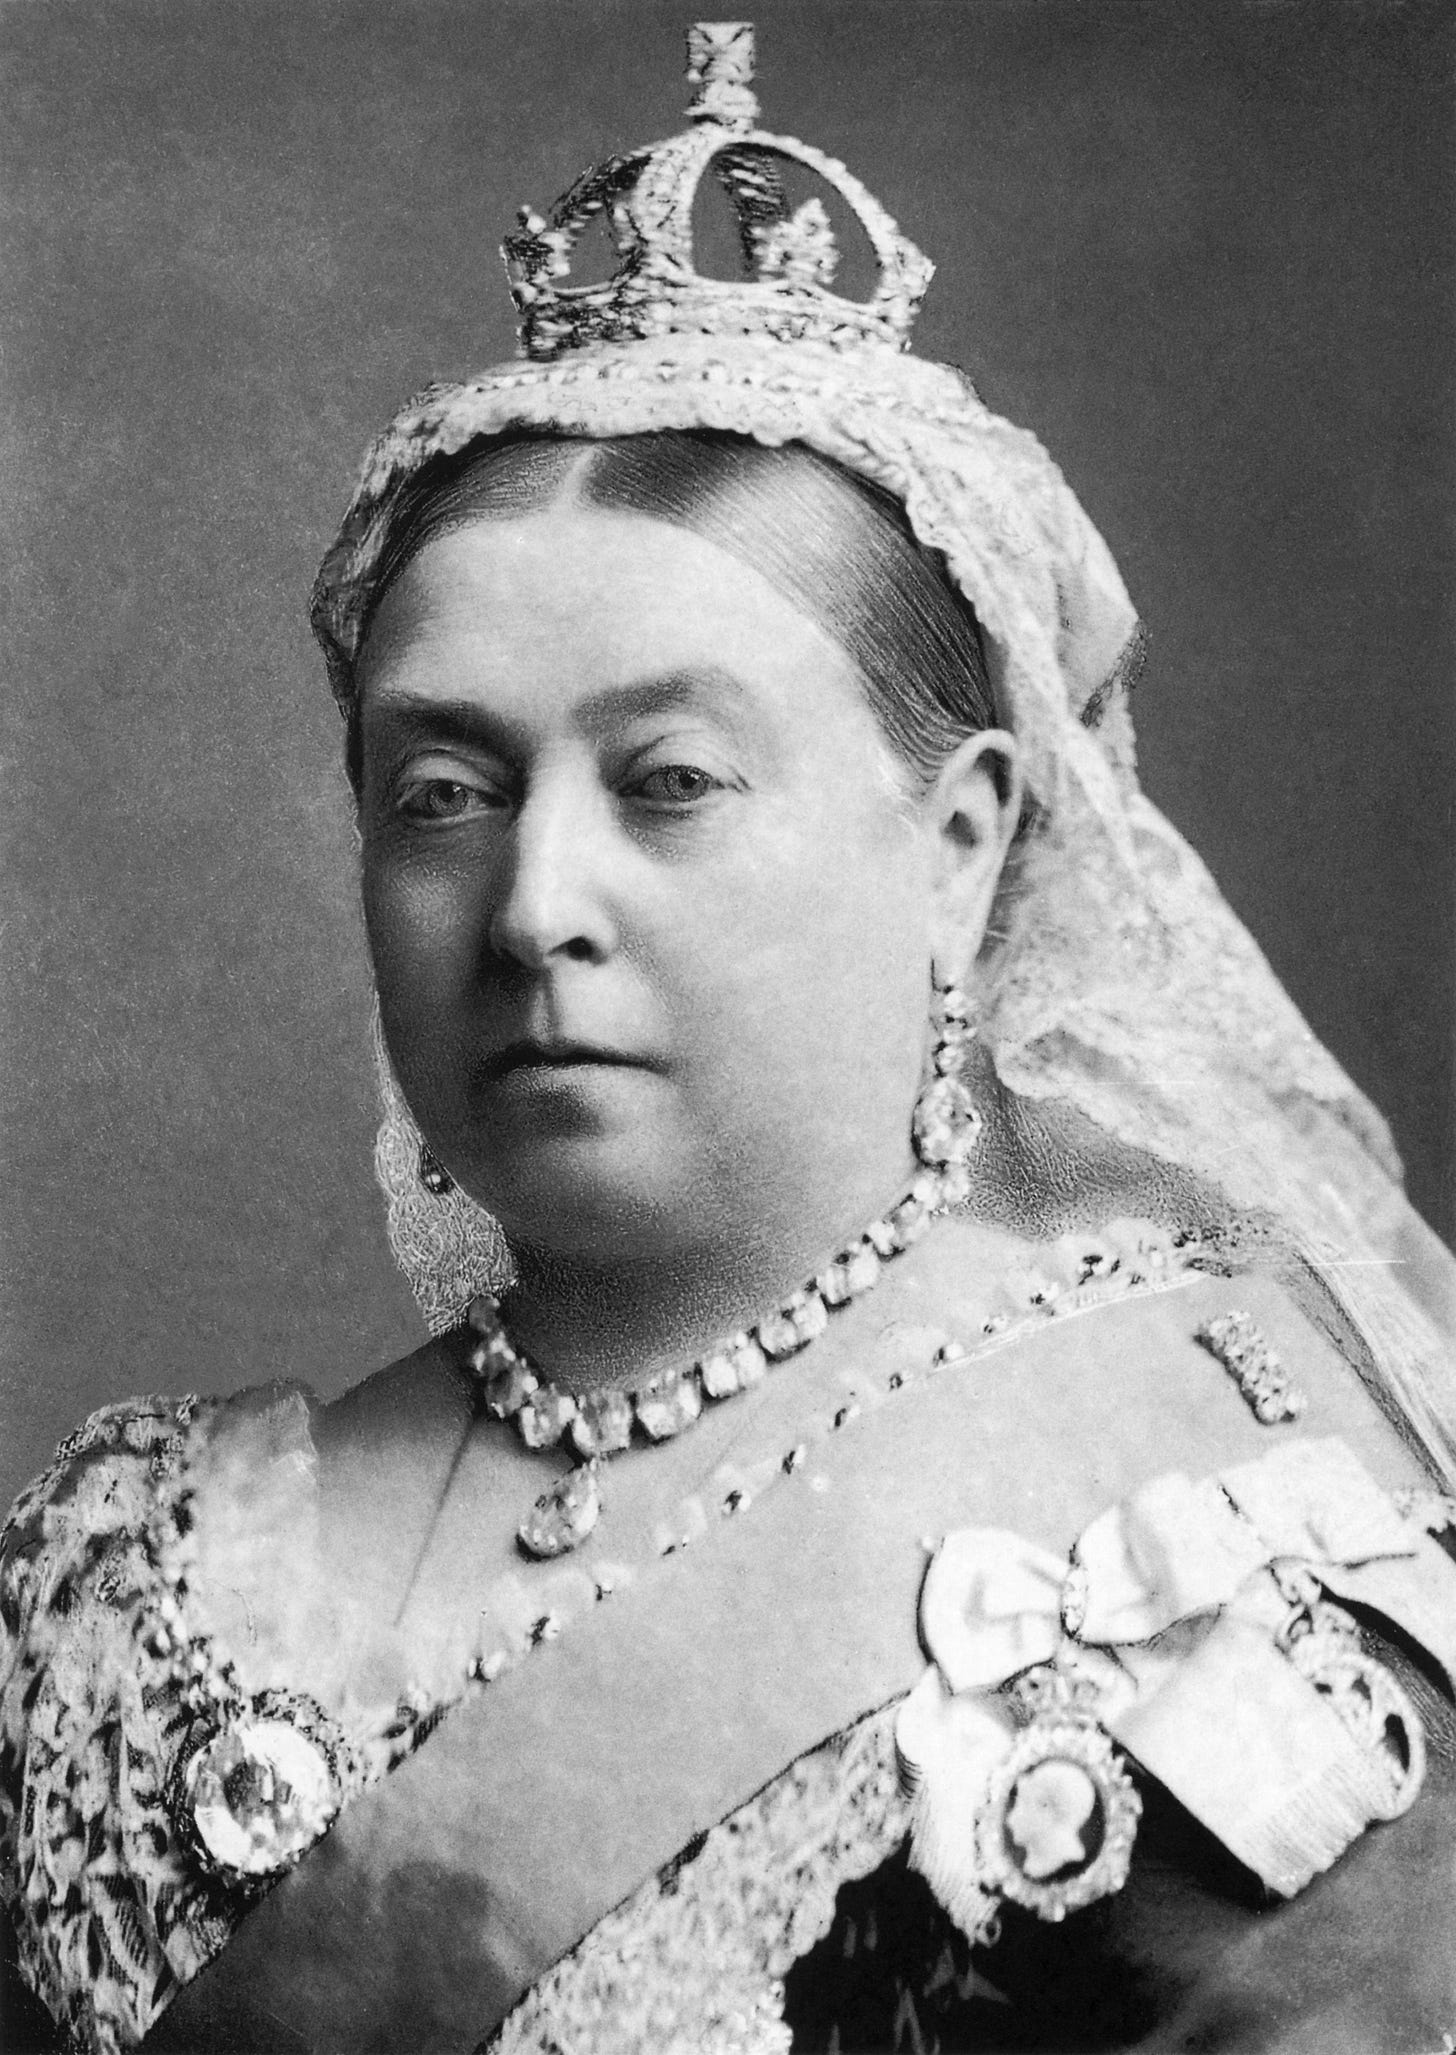 Queen Victoria looking all regal and mad